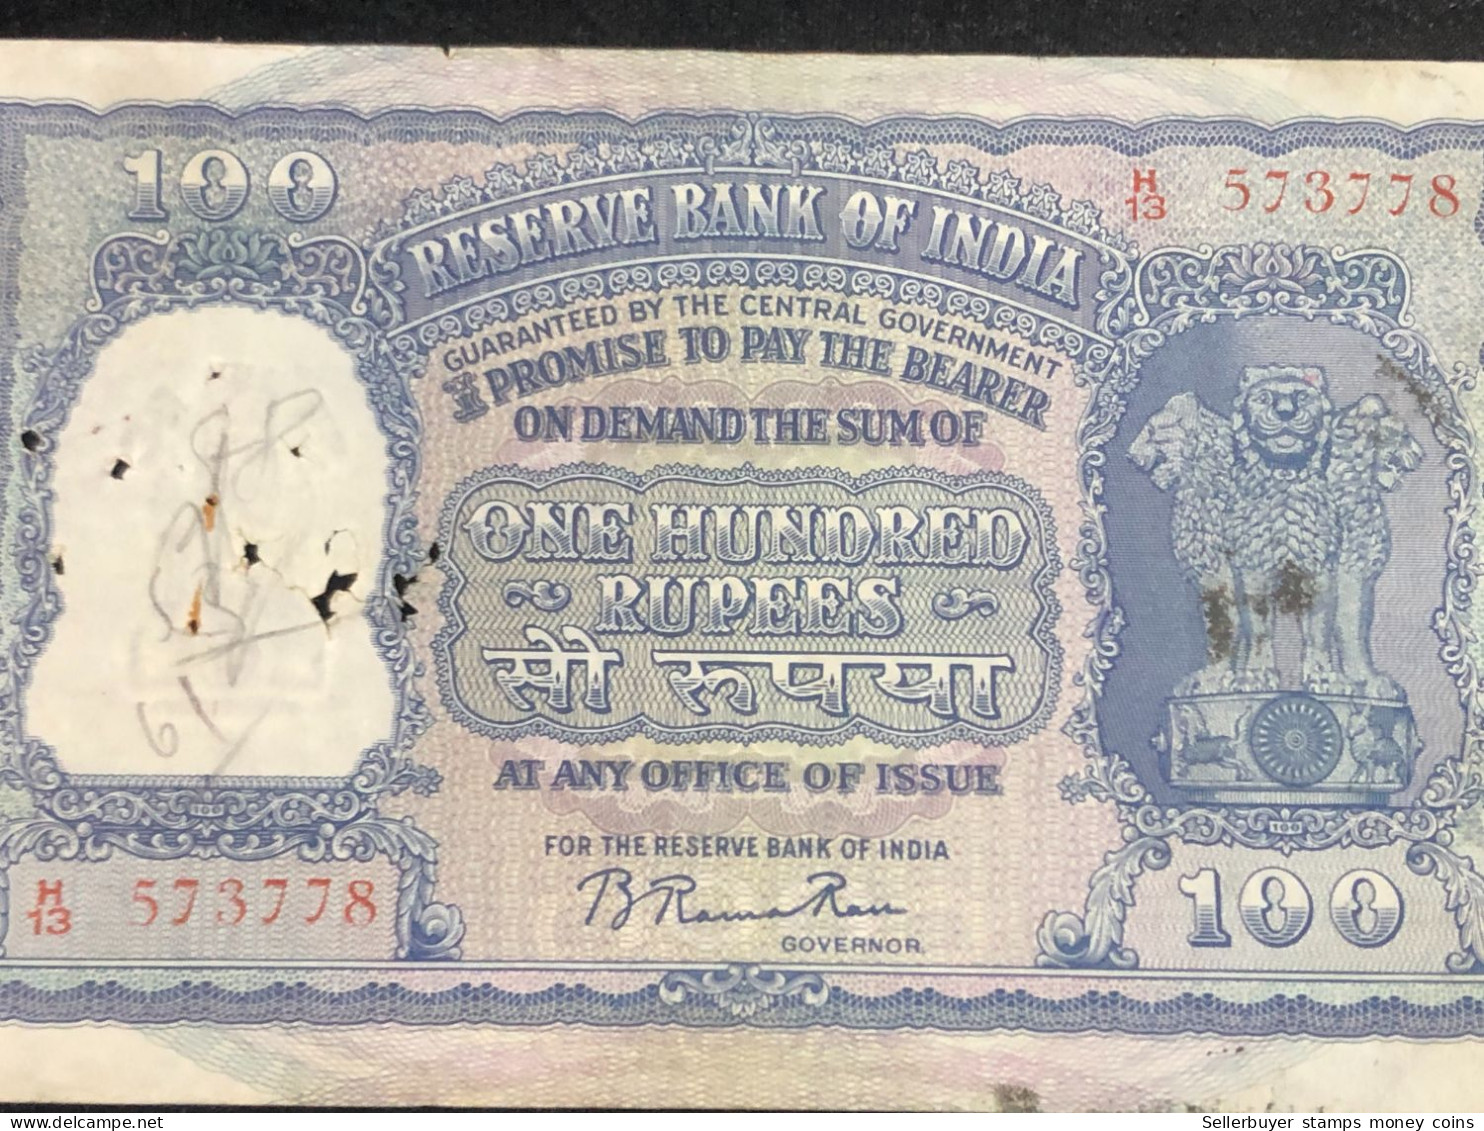 INDIA 100 RUPEES P-43  1957 TIGER ELEPHANT DAM MONEY BILL Rhas pinhole ARE BANK NOTE Red numbers above and below 1 pcs a